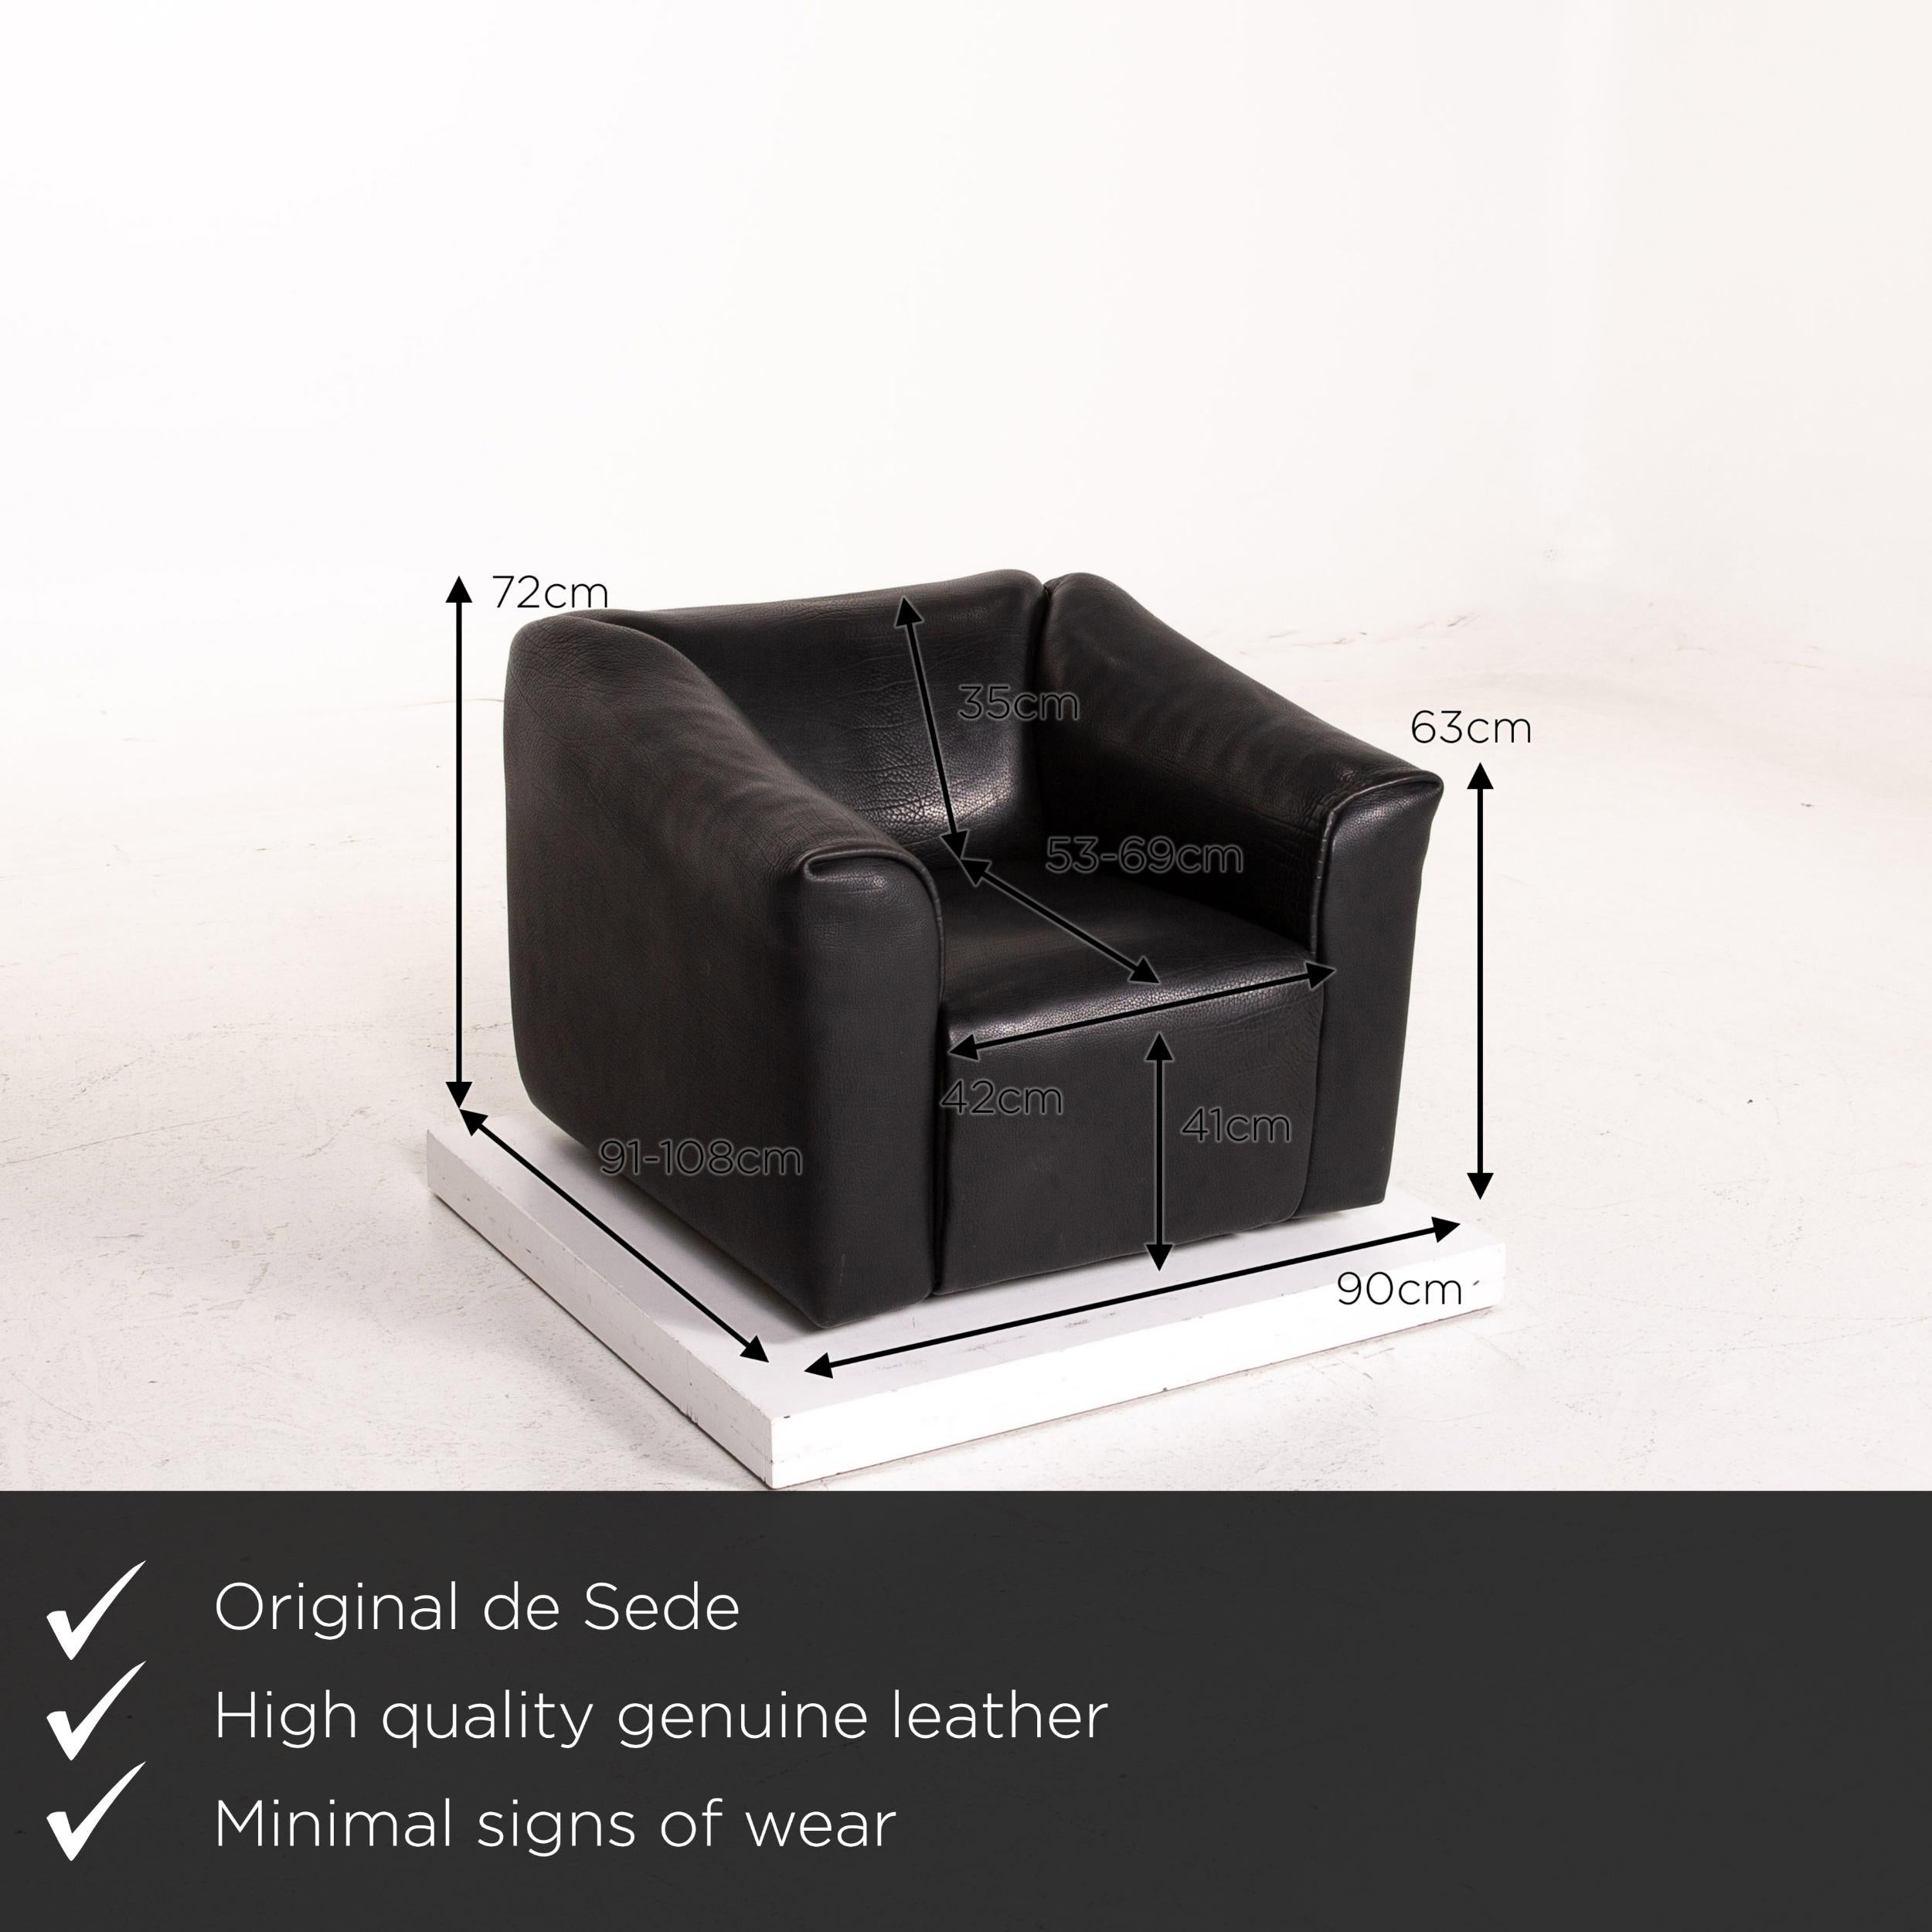 We present to you a De Sede DS 47 leather armchair black.

 

 Product measurements in centimeters:
 

Depth 91
Width 90
Height 72
Seat height 41
Rest height 63
Seat depth 53
Seat width 42
Back height 35.